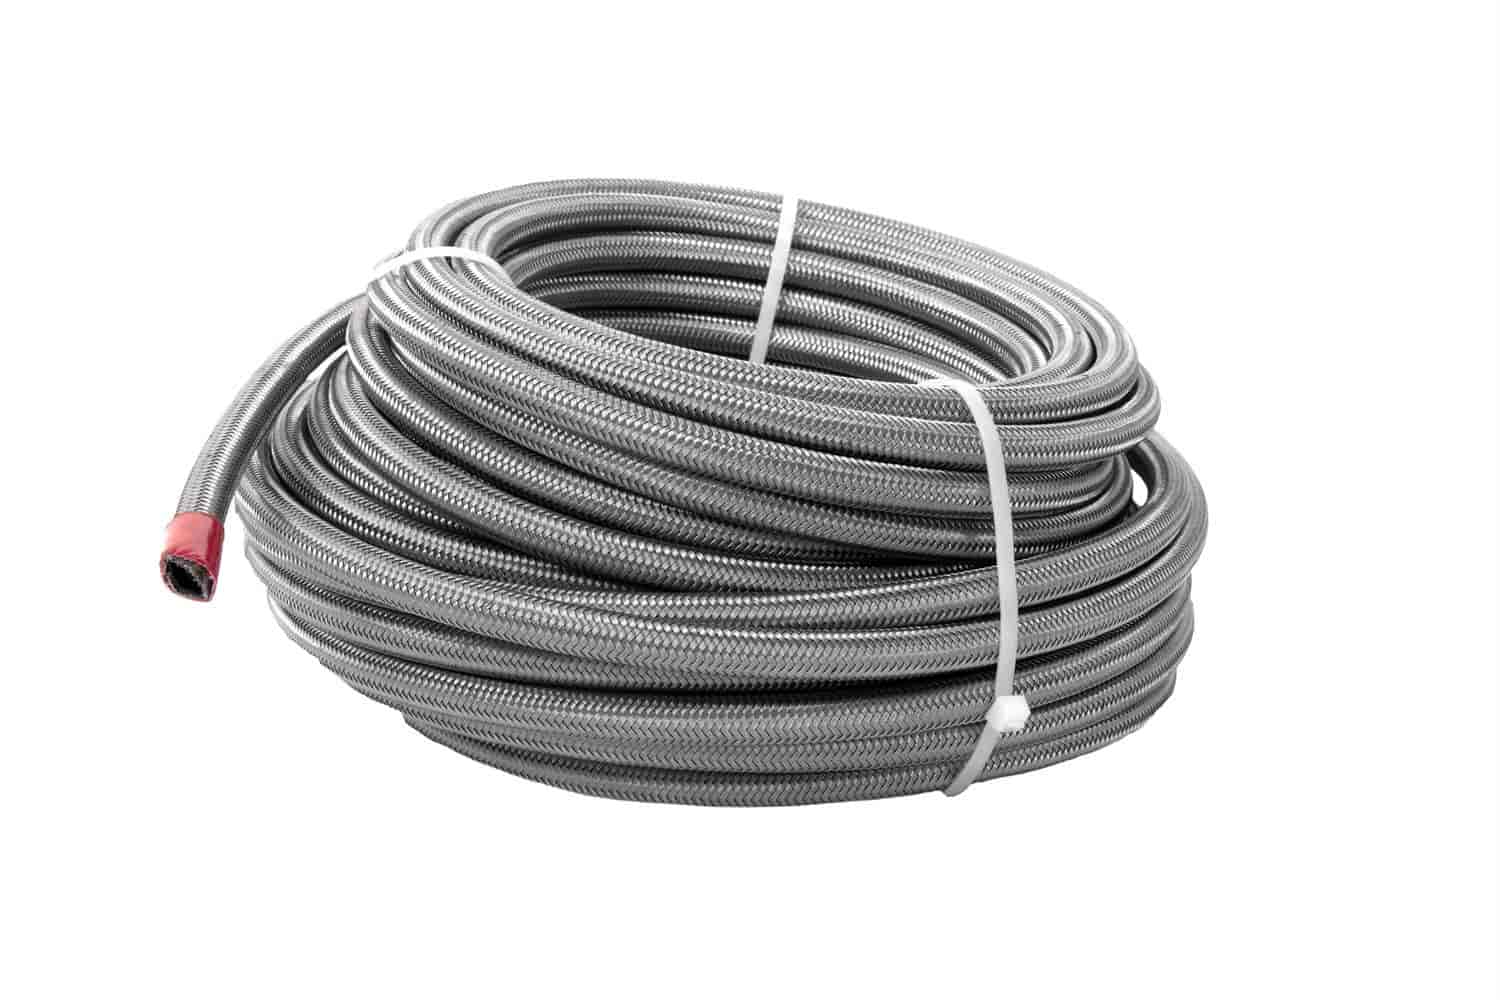 Braided Stainless Steel PTFE Fuel Hose -6 AN x 16 ft.